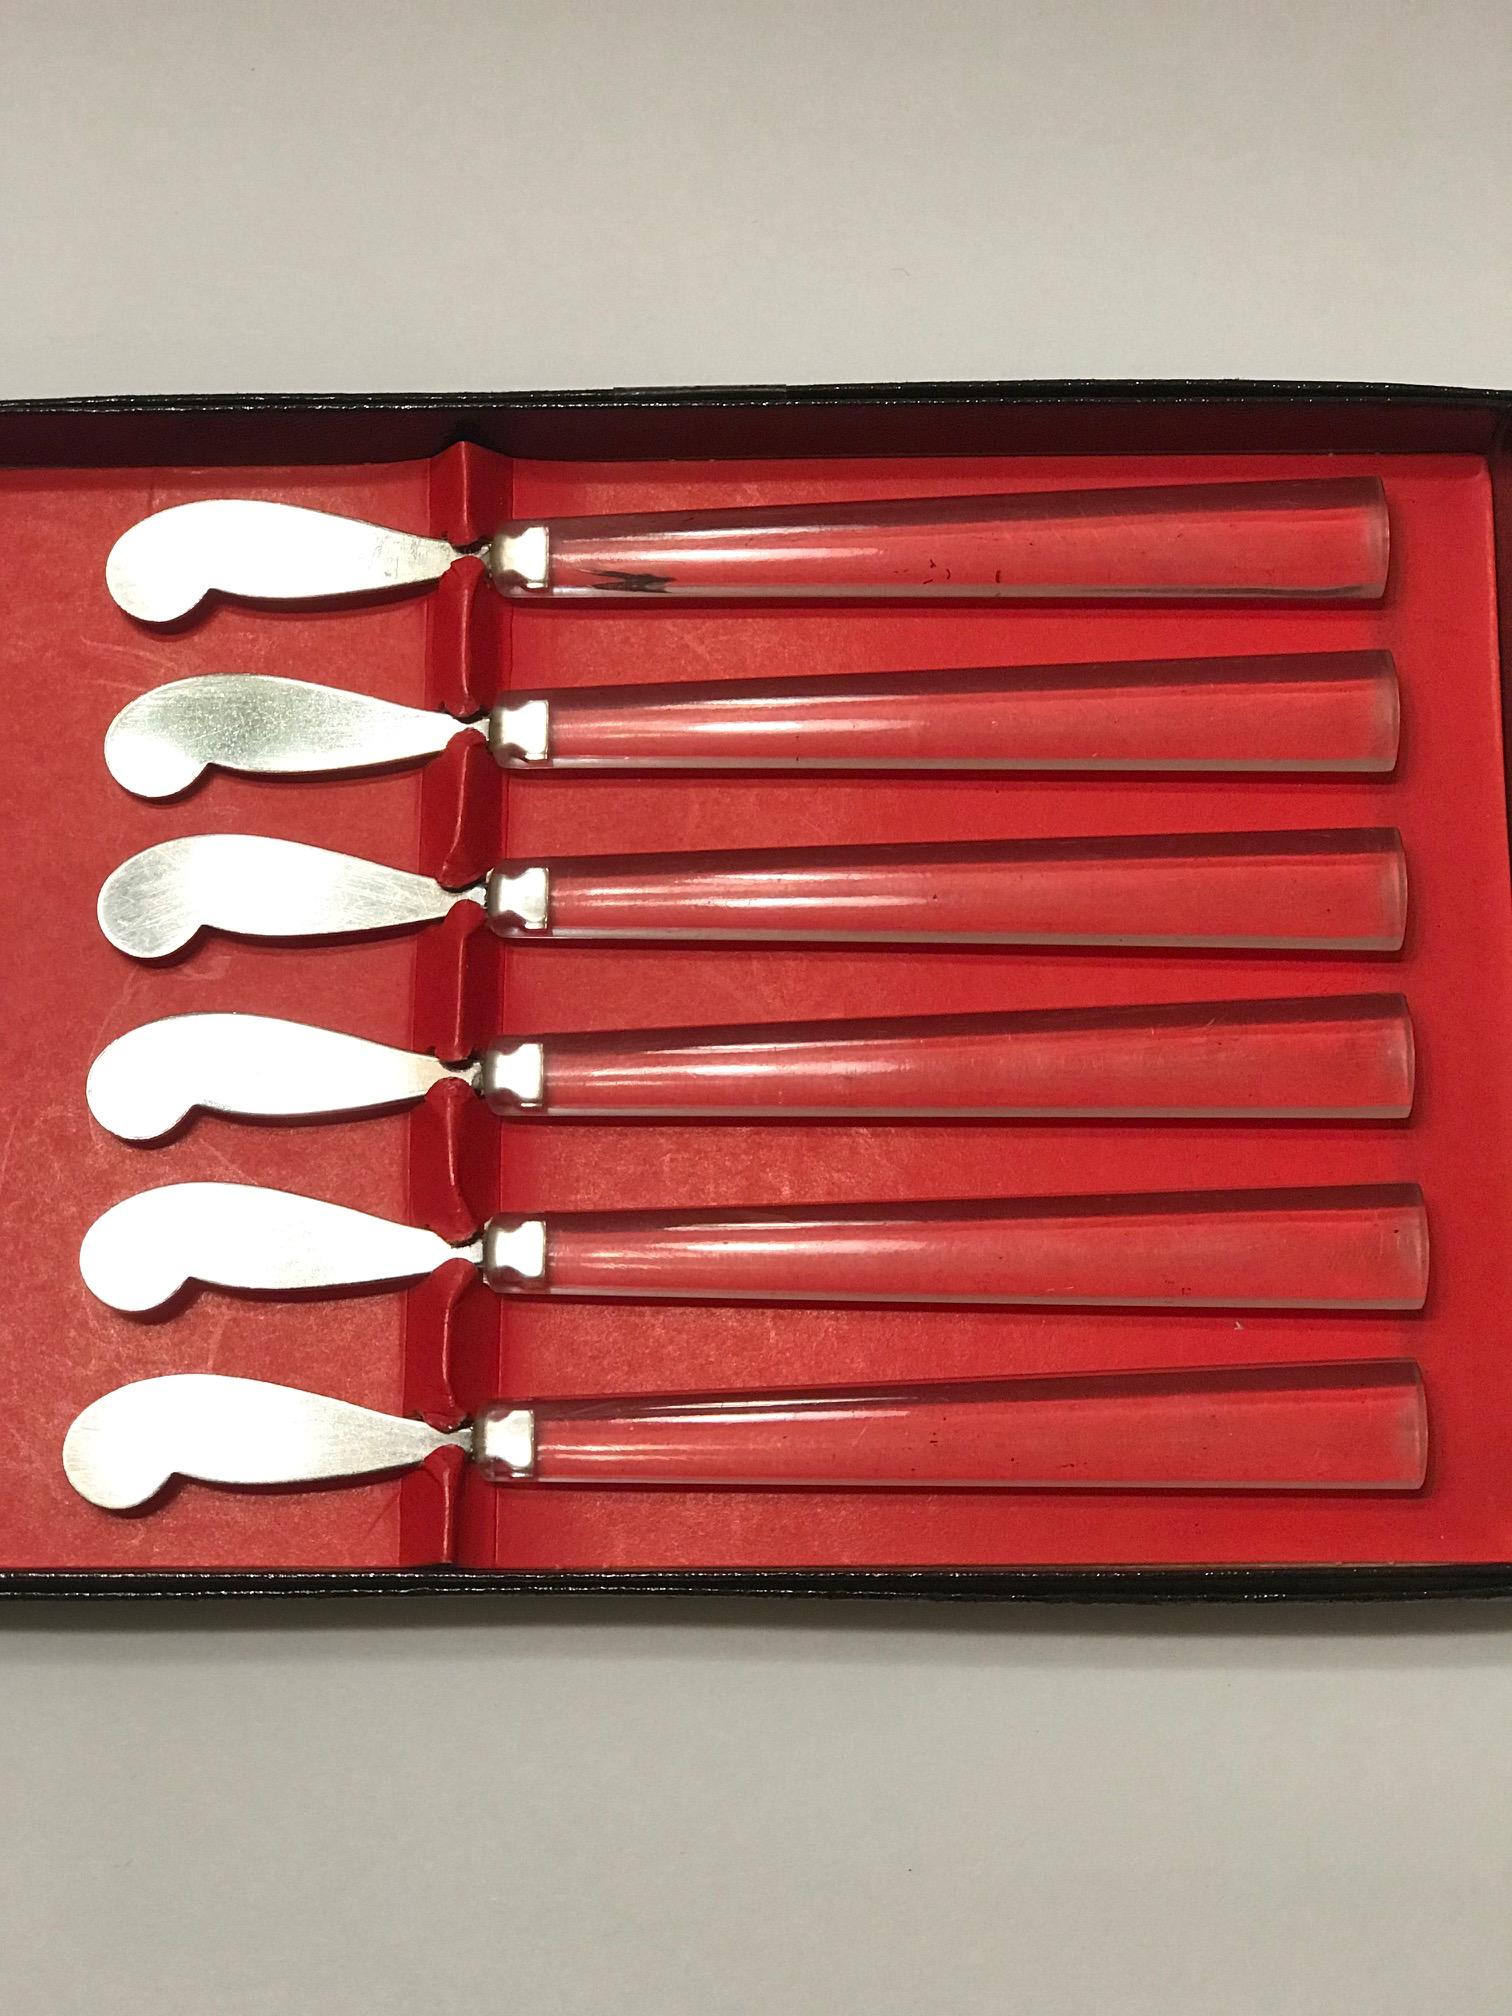 Set of vintage hors d'oeuvre knives, butter knives, or cheese spreaders in stainless steel with Lucite handles. A cheerful addition to any barware set or serving set.